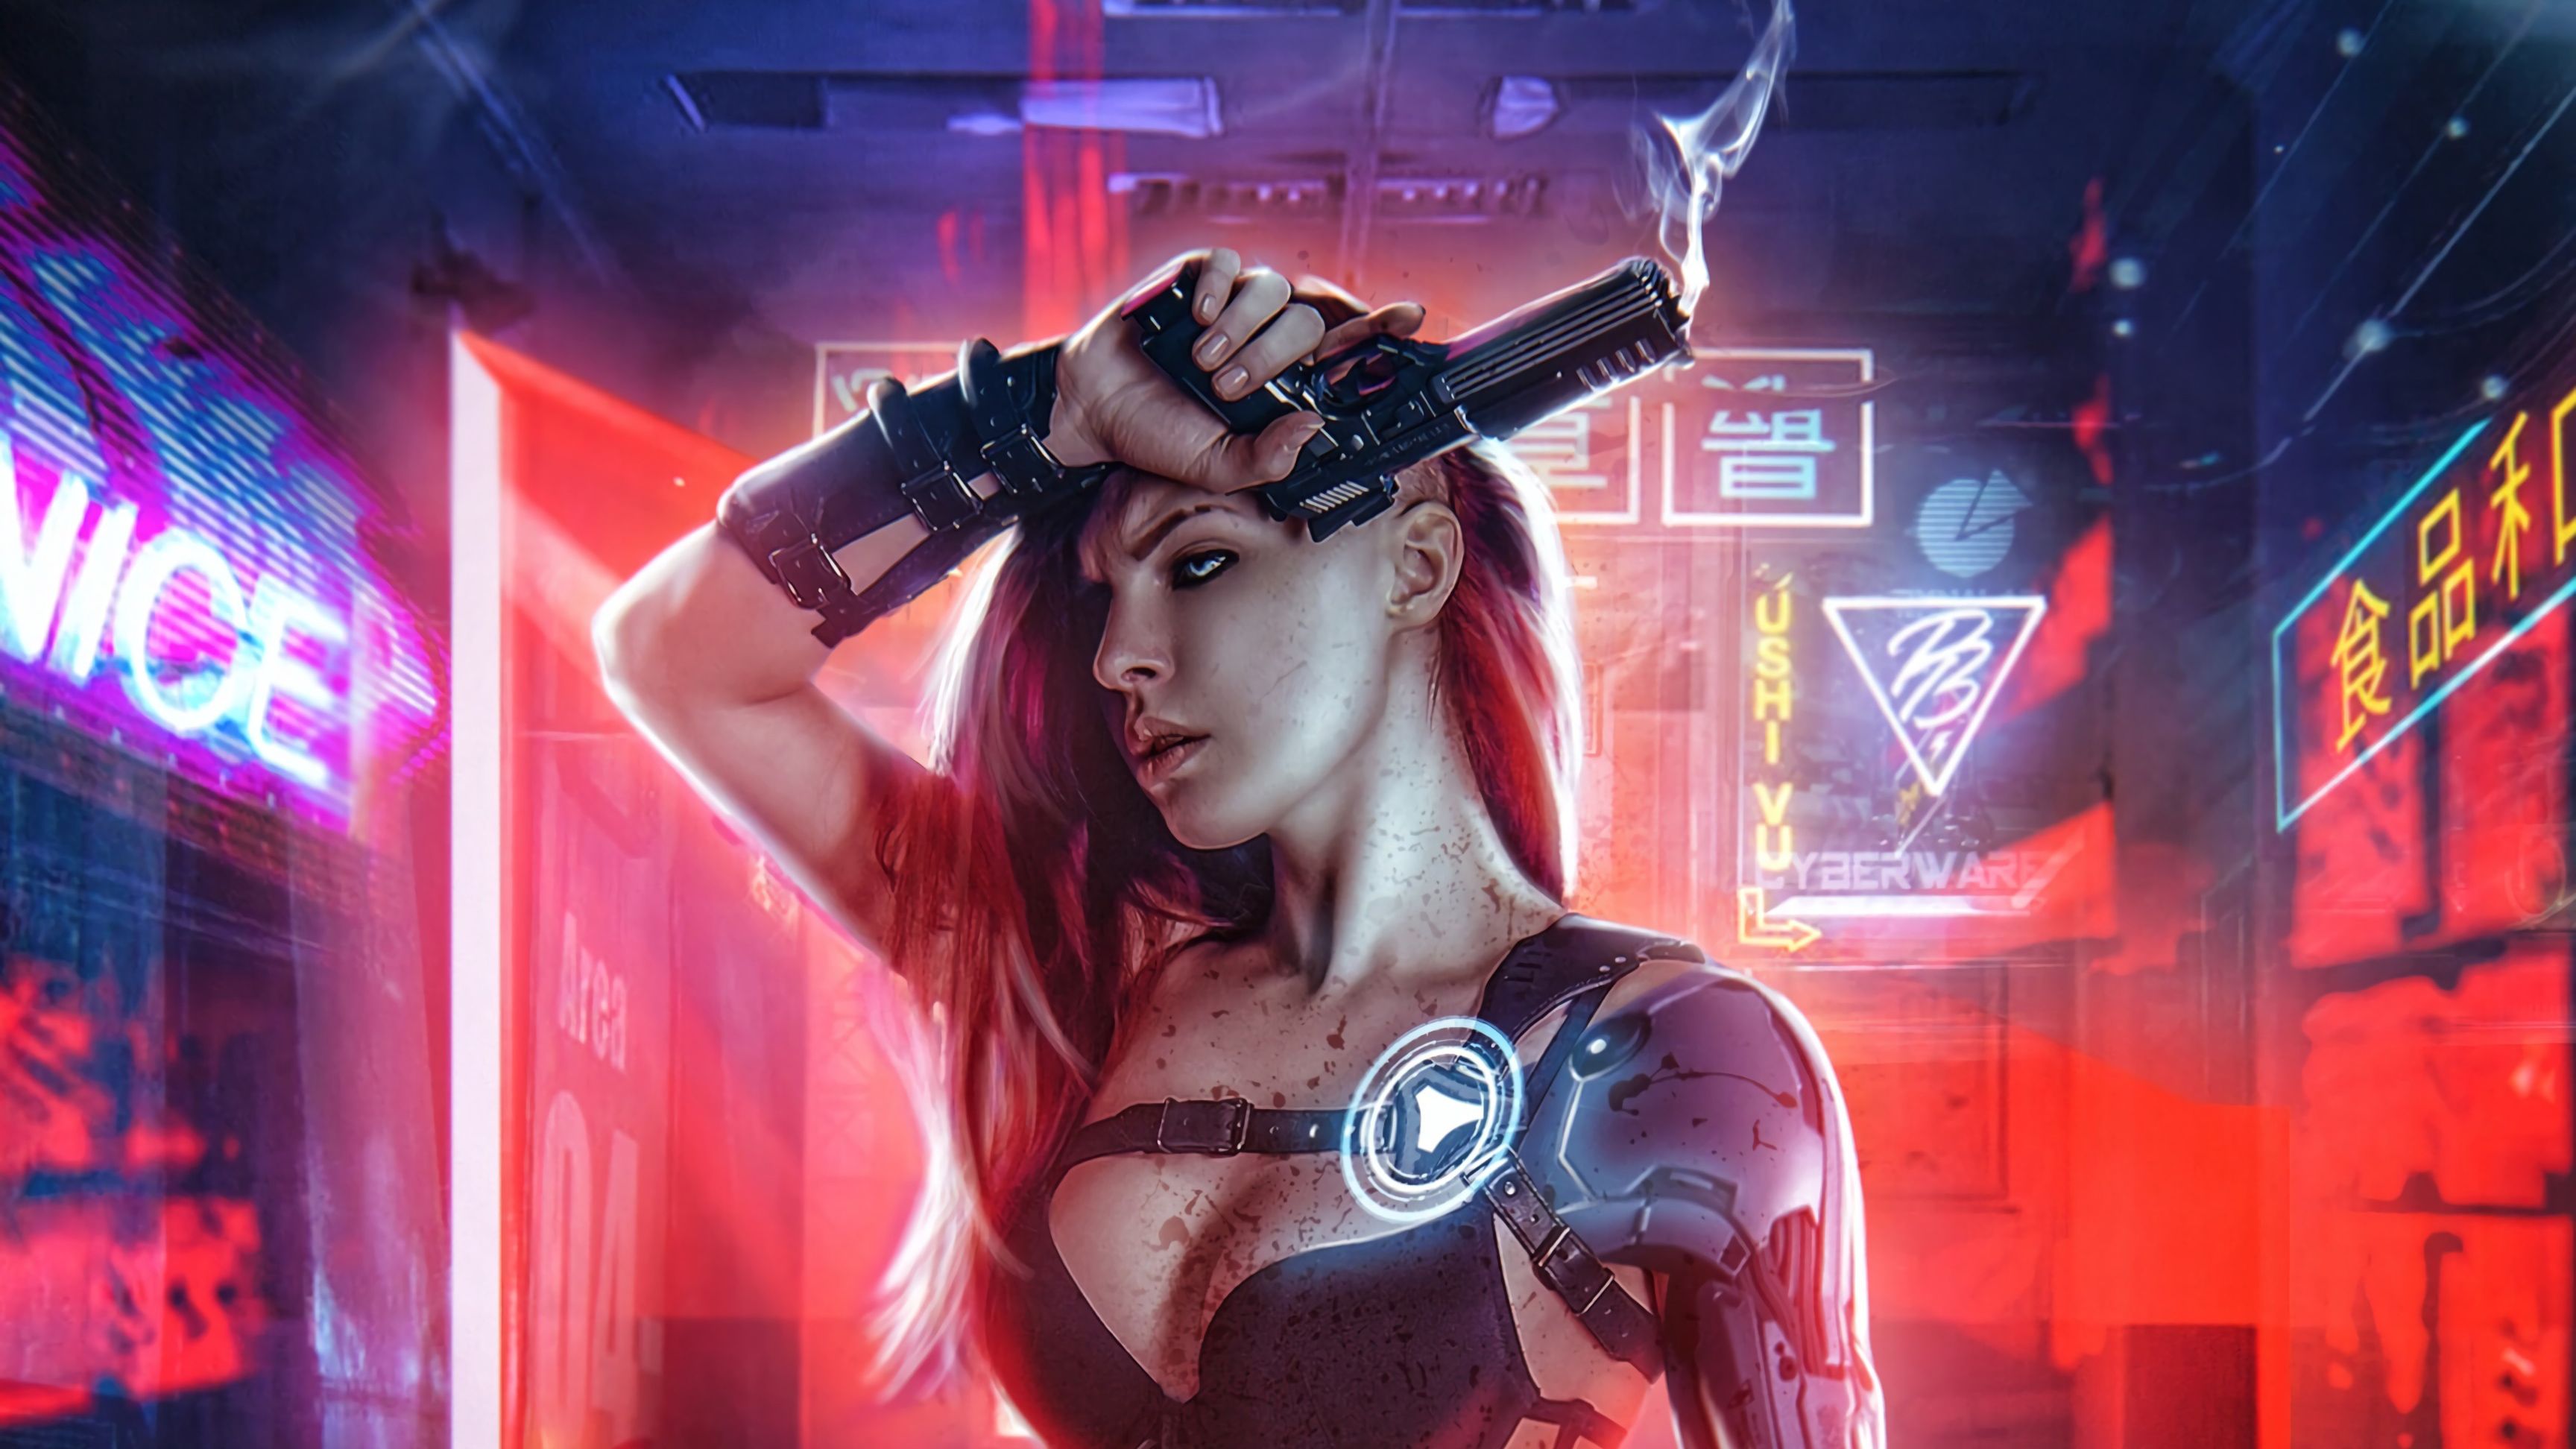 Cyberpunk 2077 Girl Art Wallpaper,HD Games Wallpapers,4k Wallpapers,Images, Backgrounds,Photos and Pictures